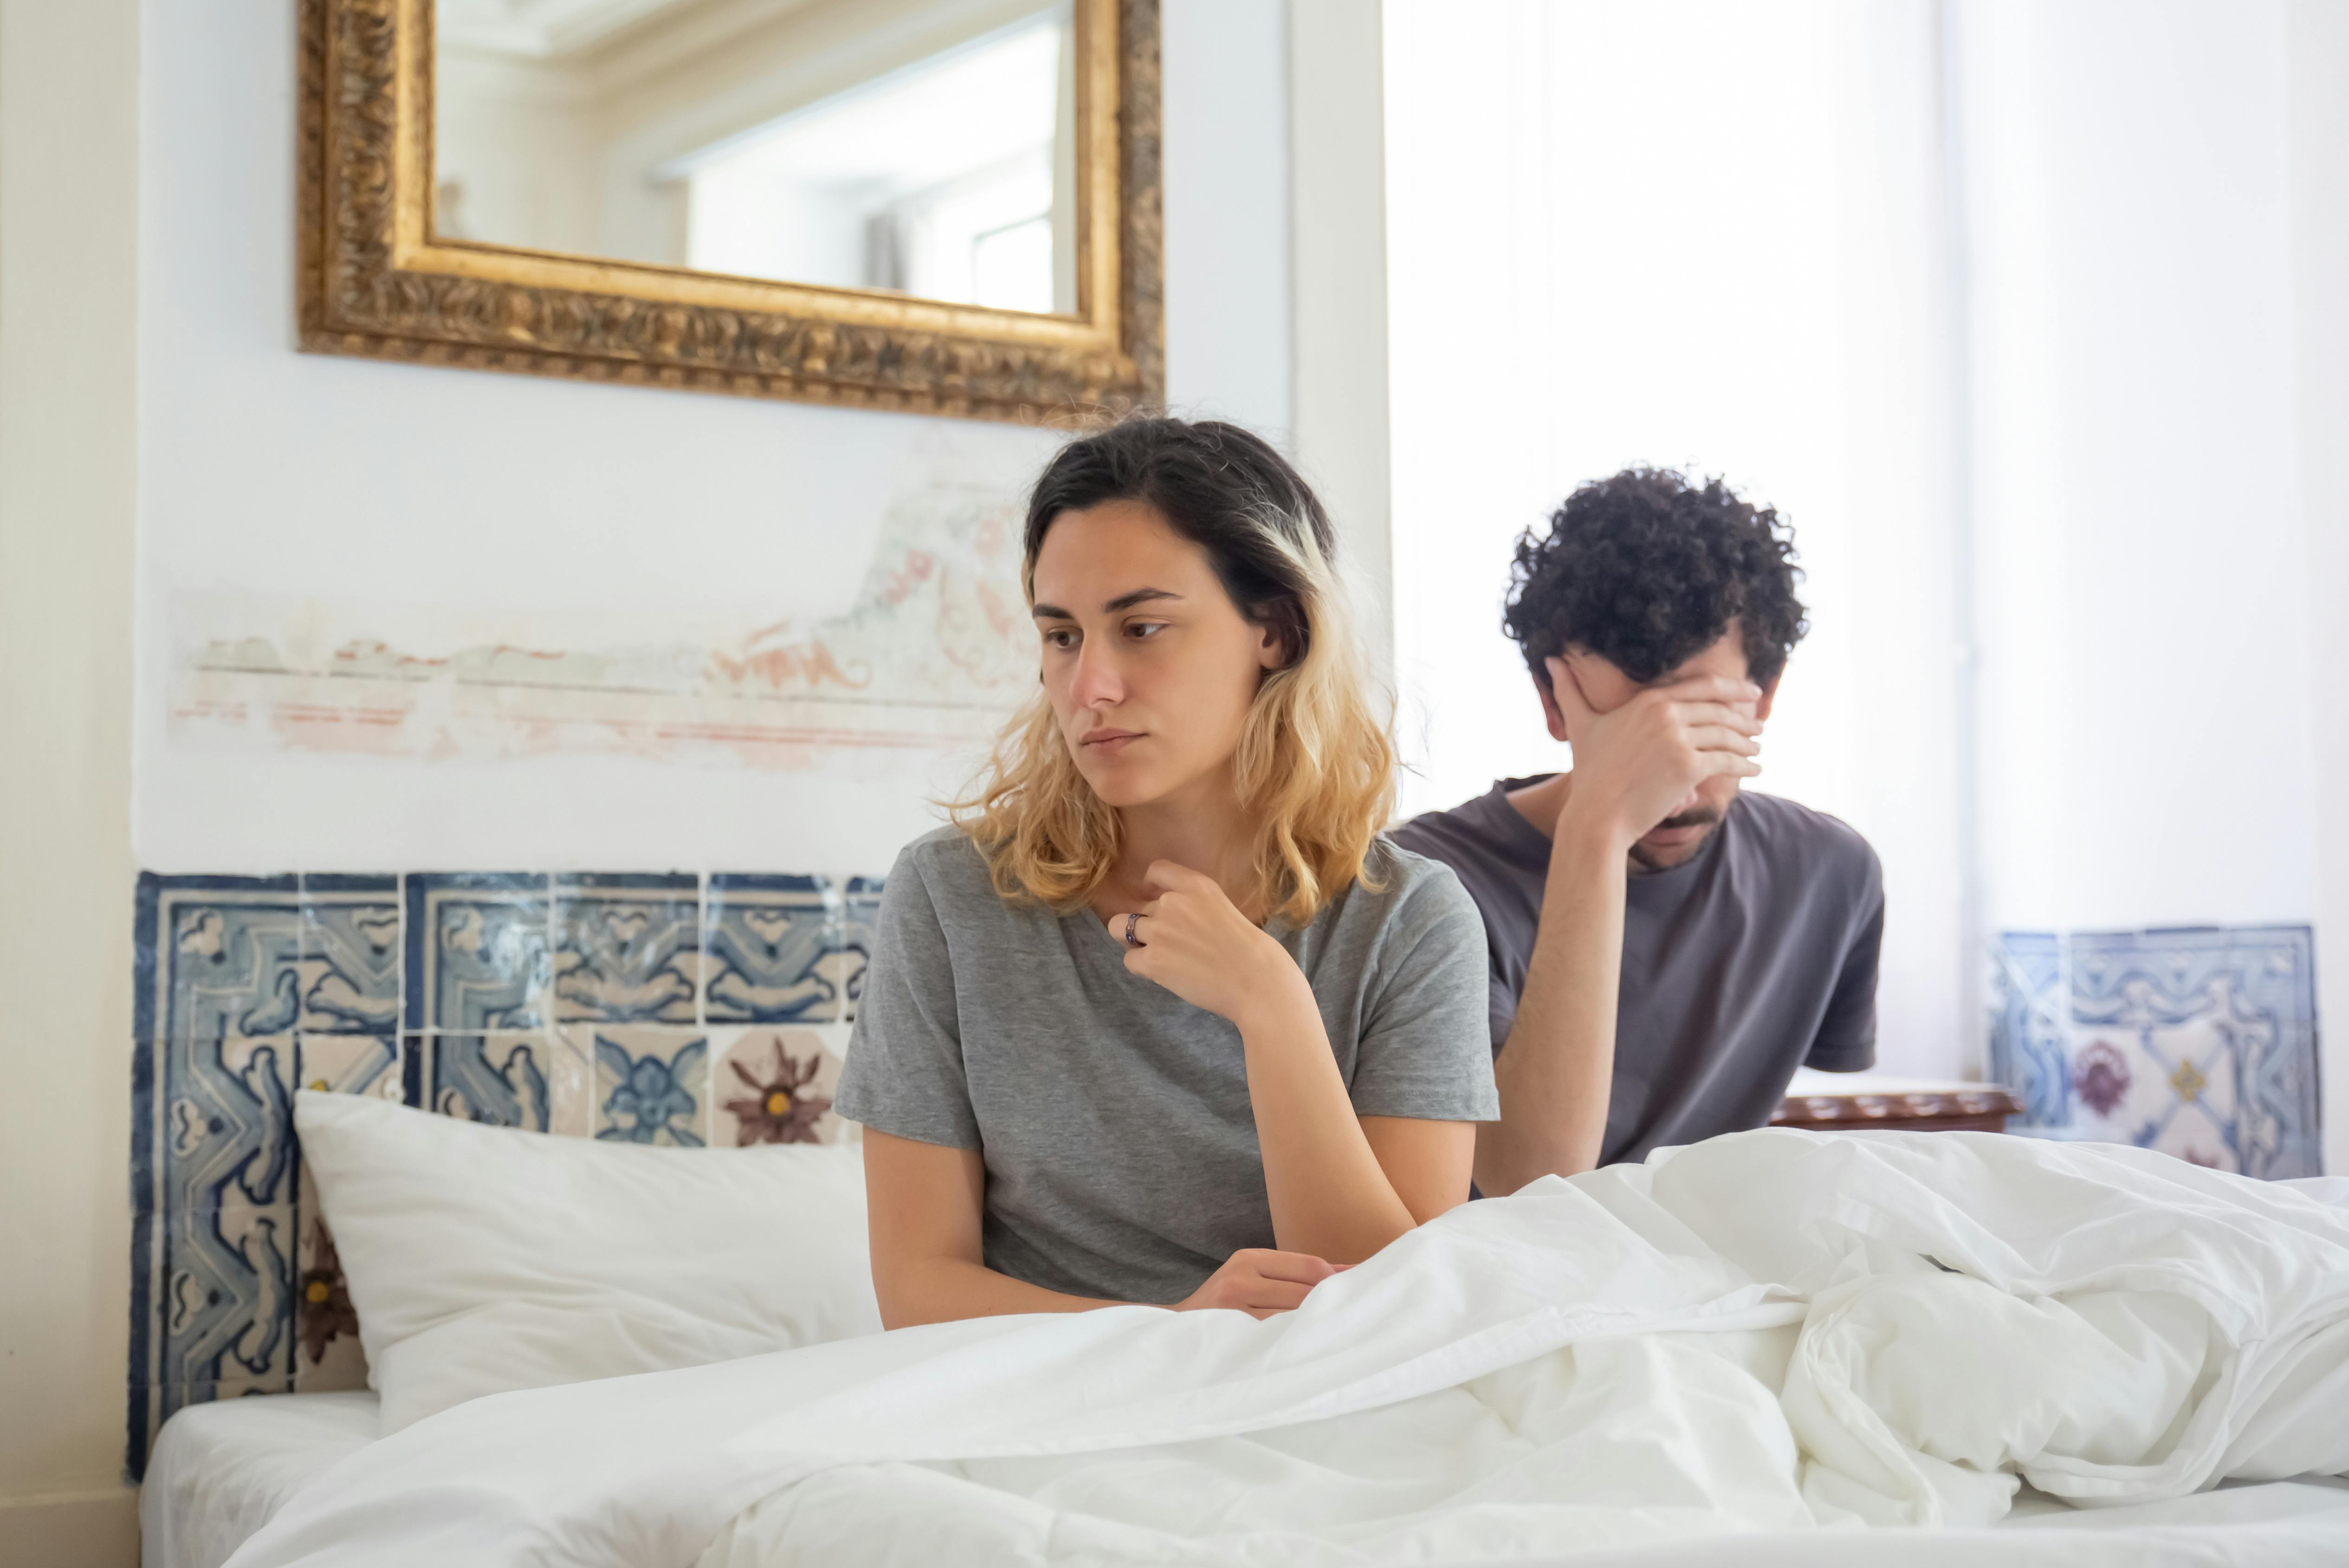 A couple having a disagreement in bed | Source: Pexels